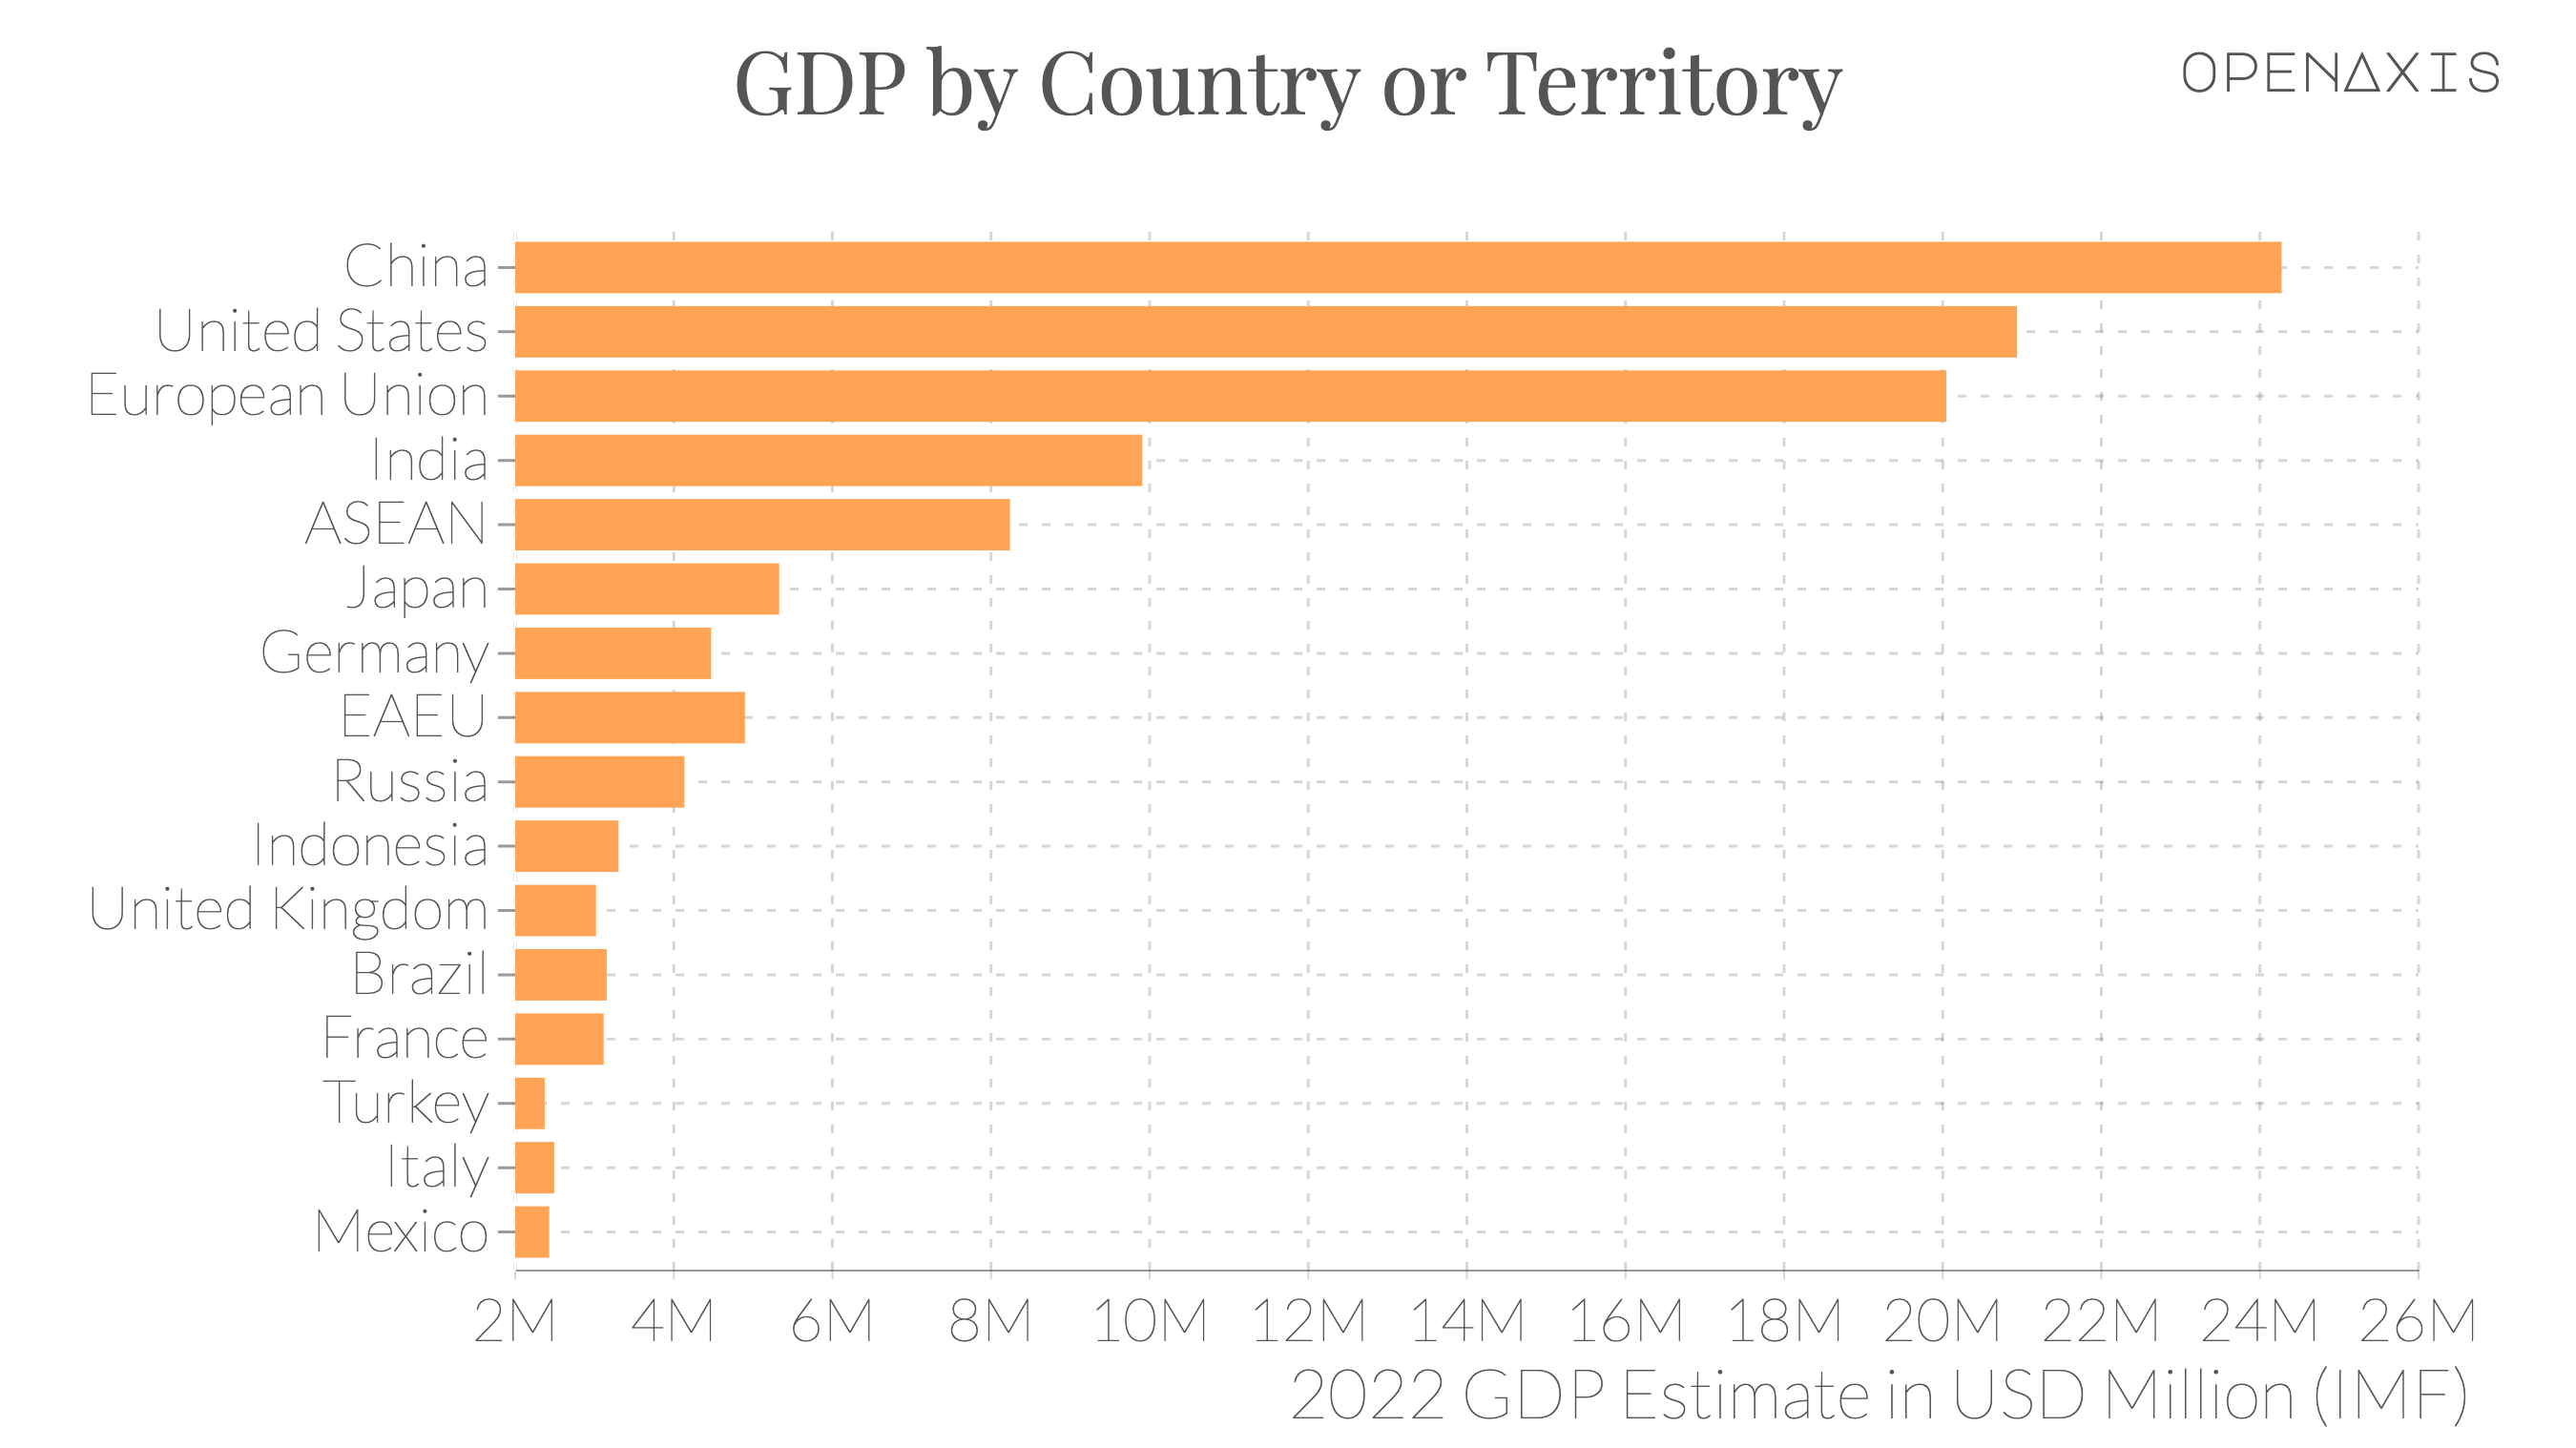 "GDP by Country or Territory"